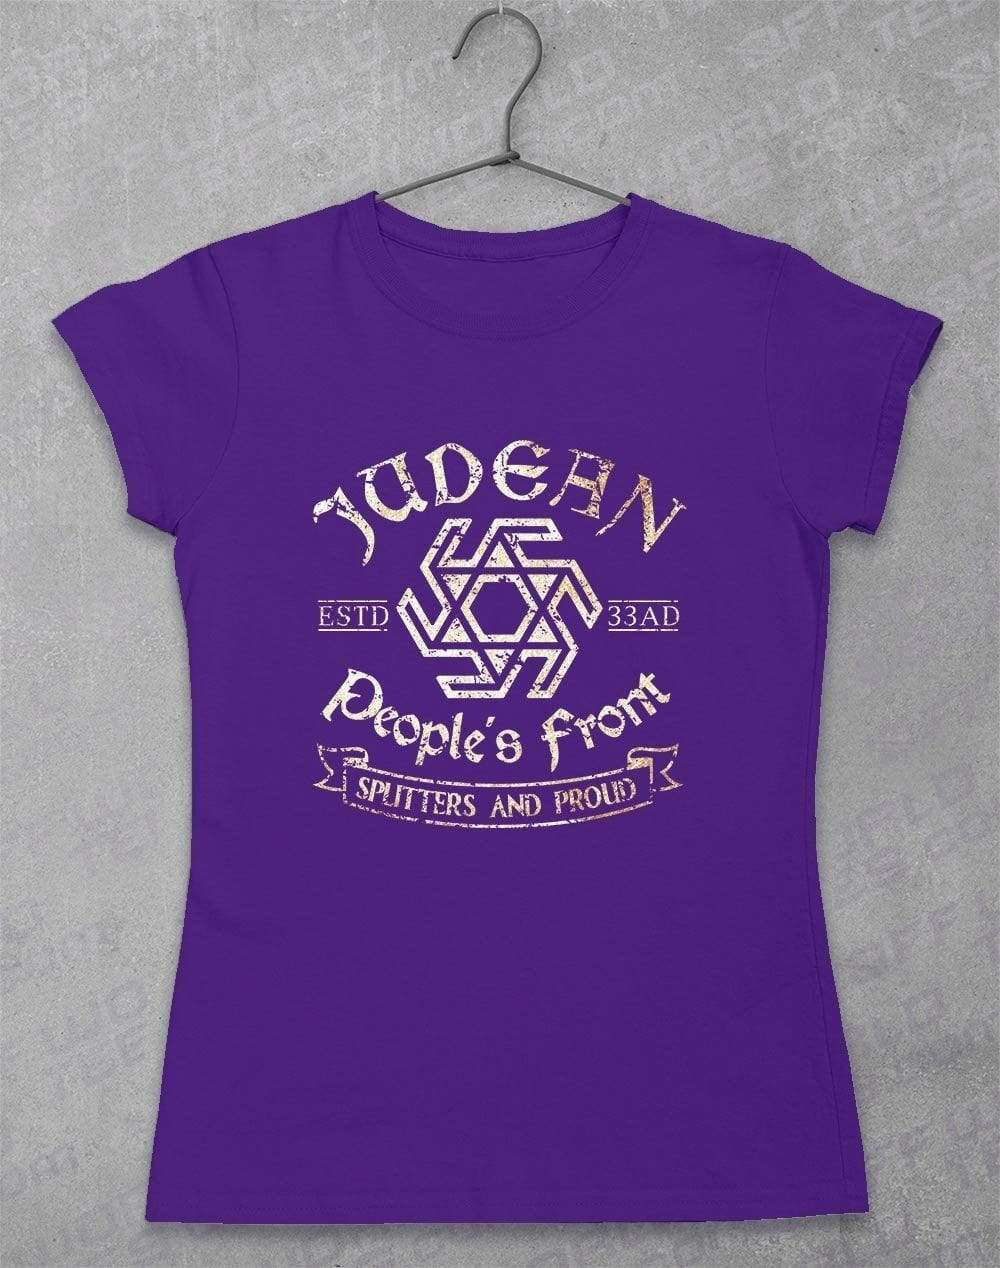 Judean People's Front Women's T-Shirt 8-10 / Lilac  - Off World Tees